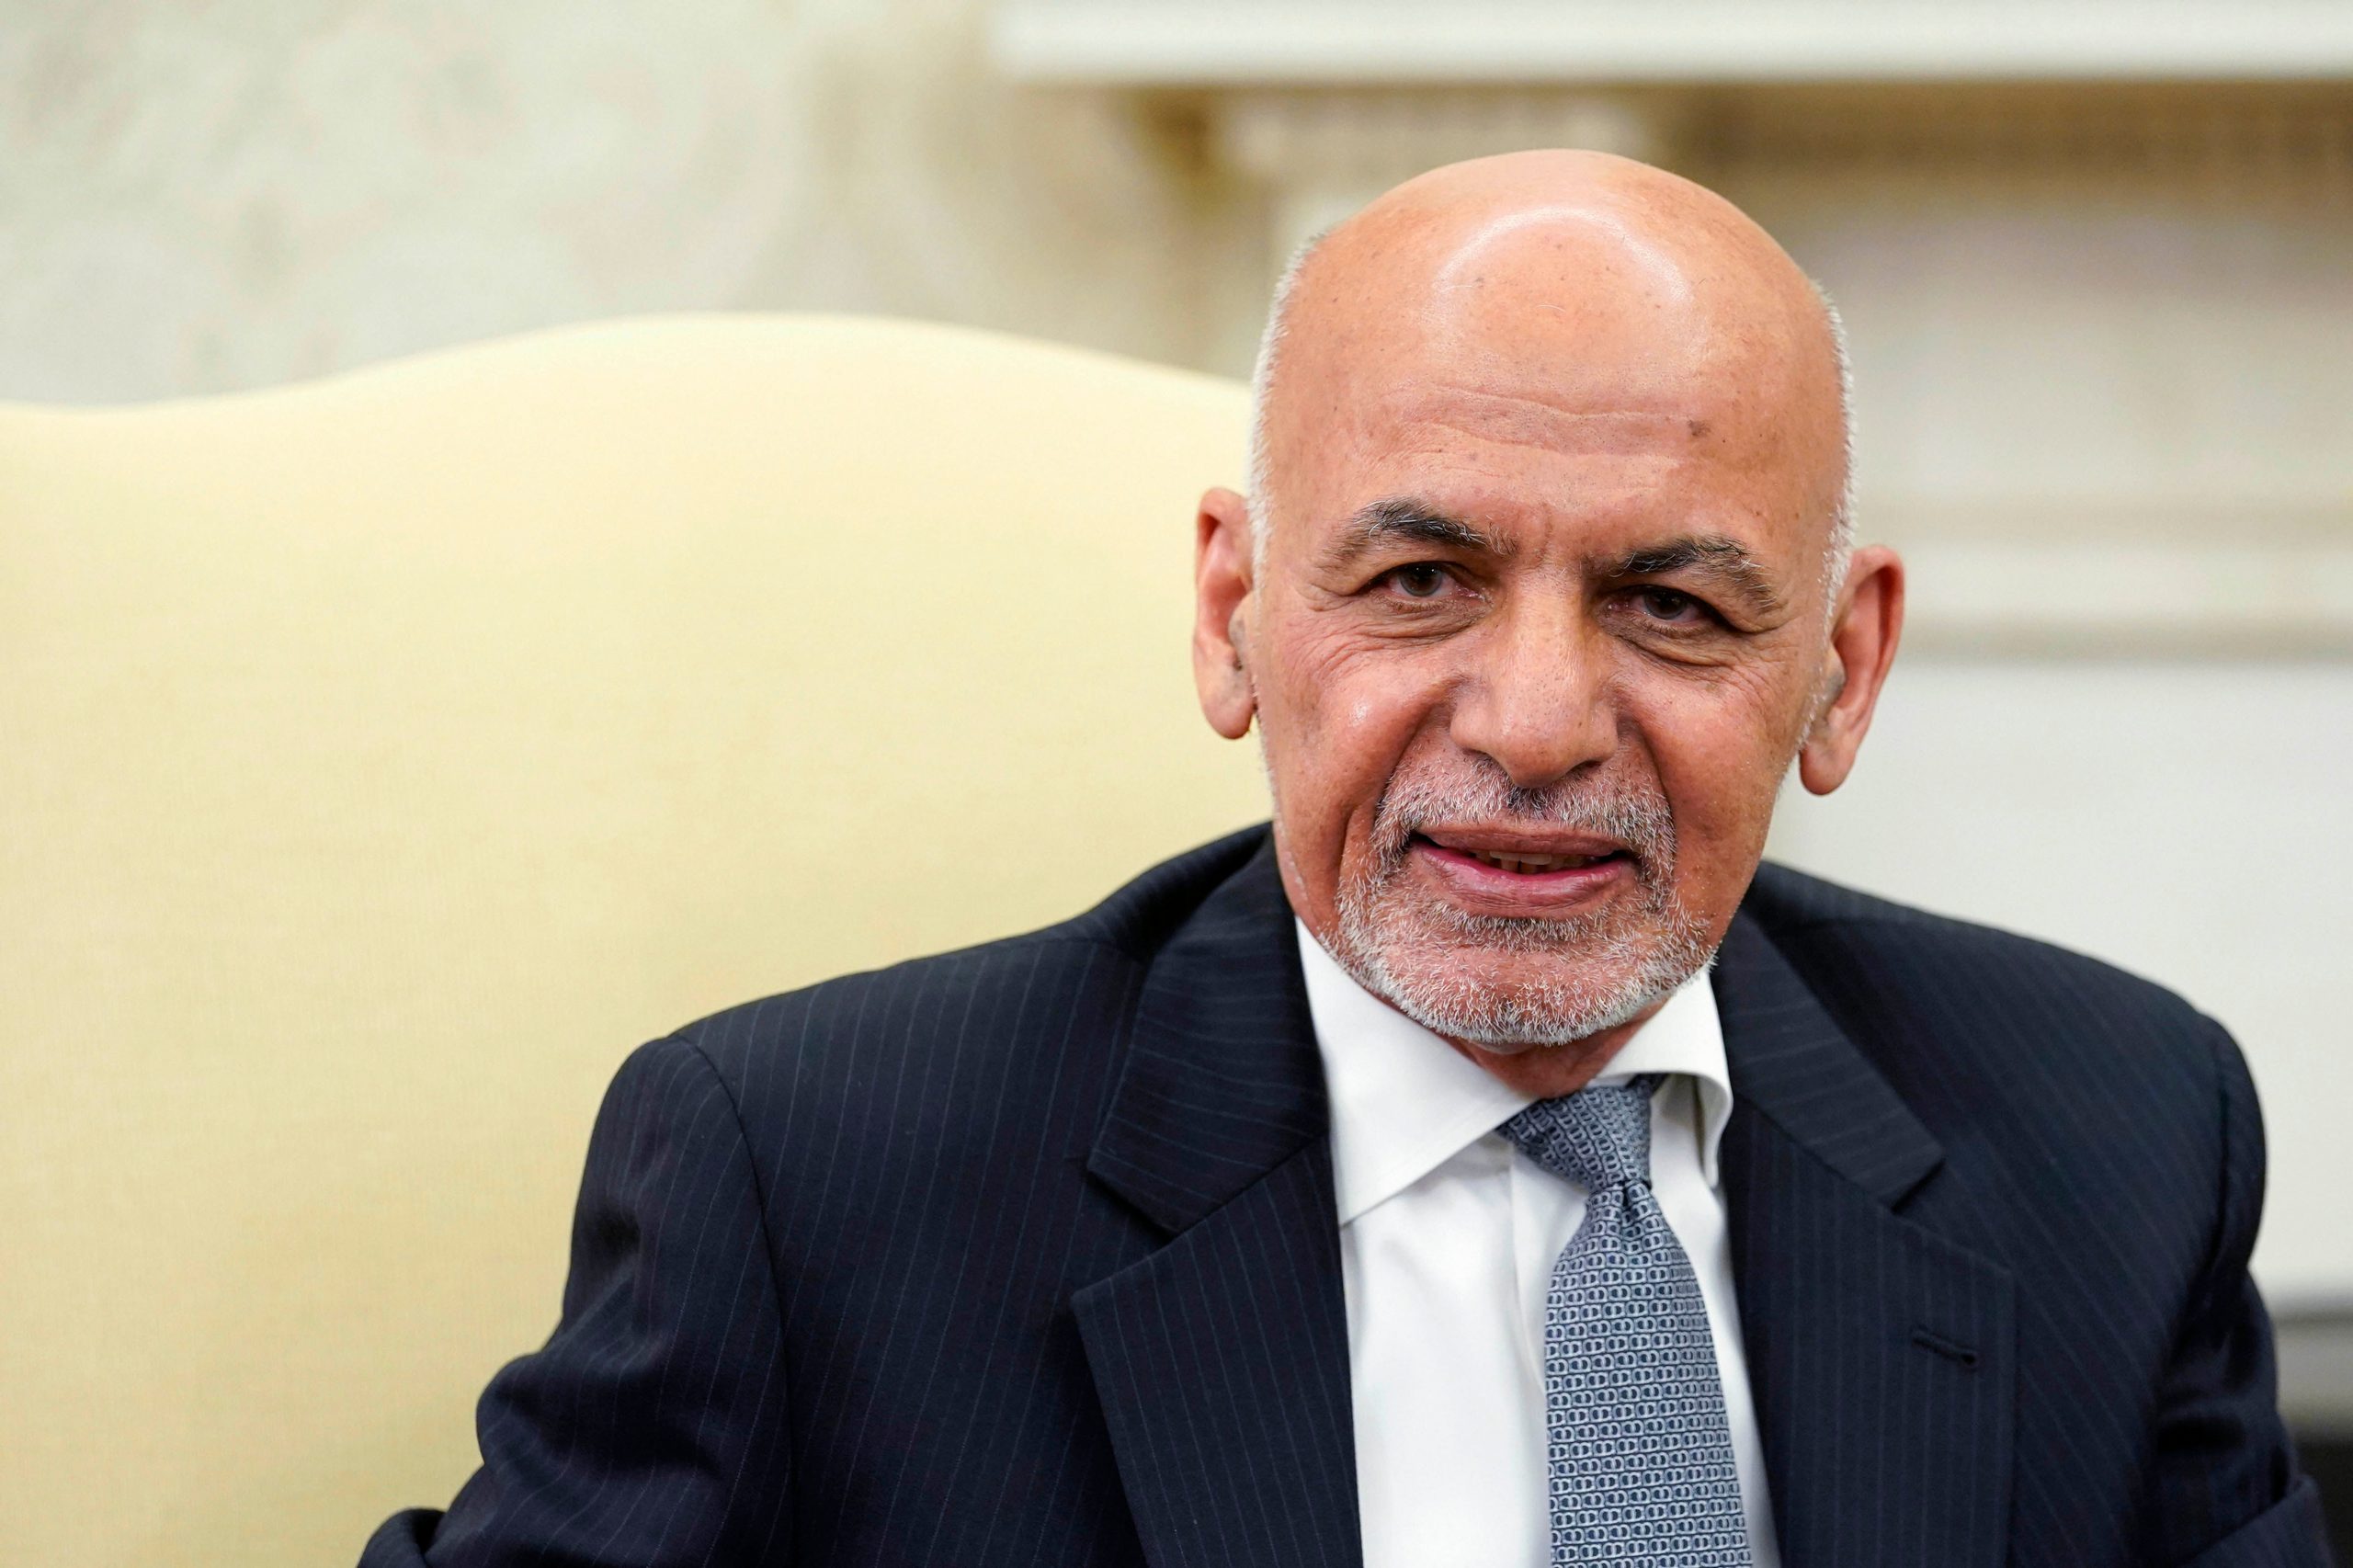 President Ashraf Ghani says had to flee Afghanistan or ‘Kabul would be destroyed’